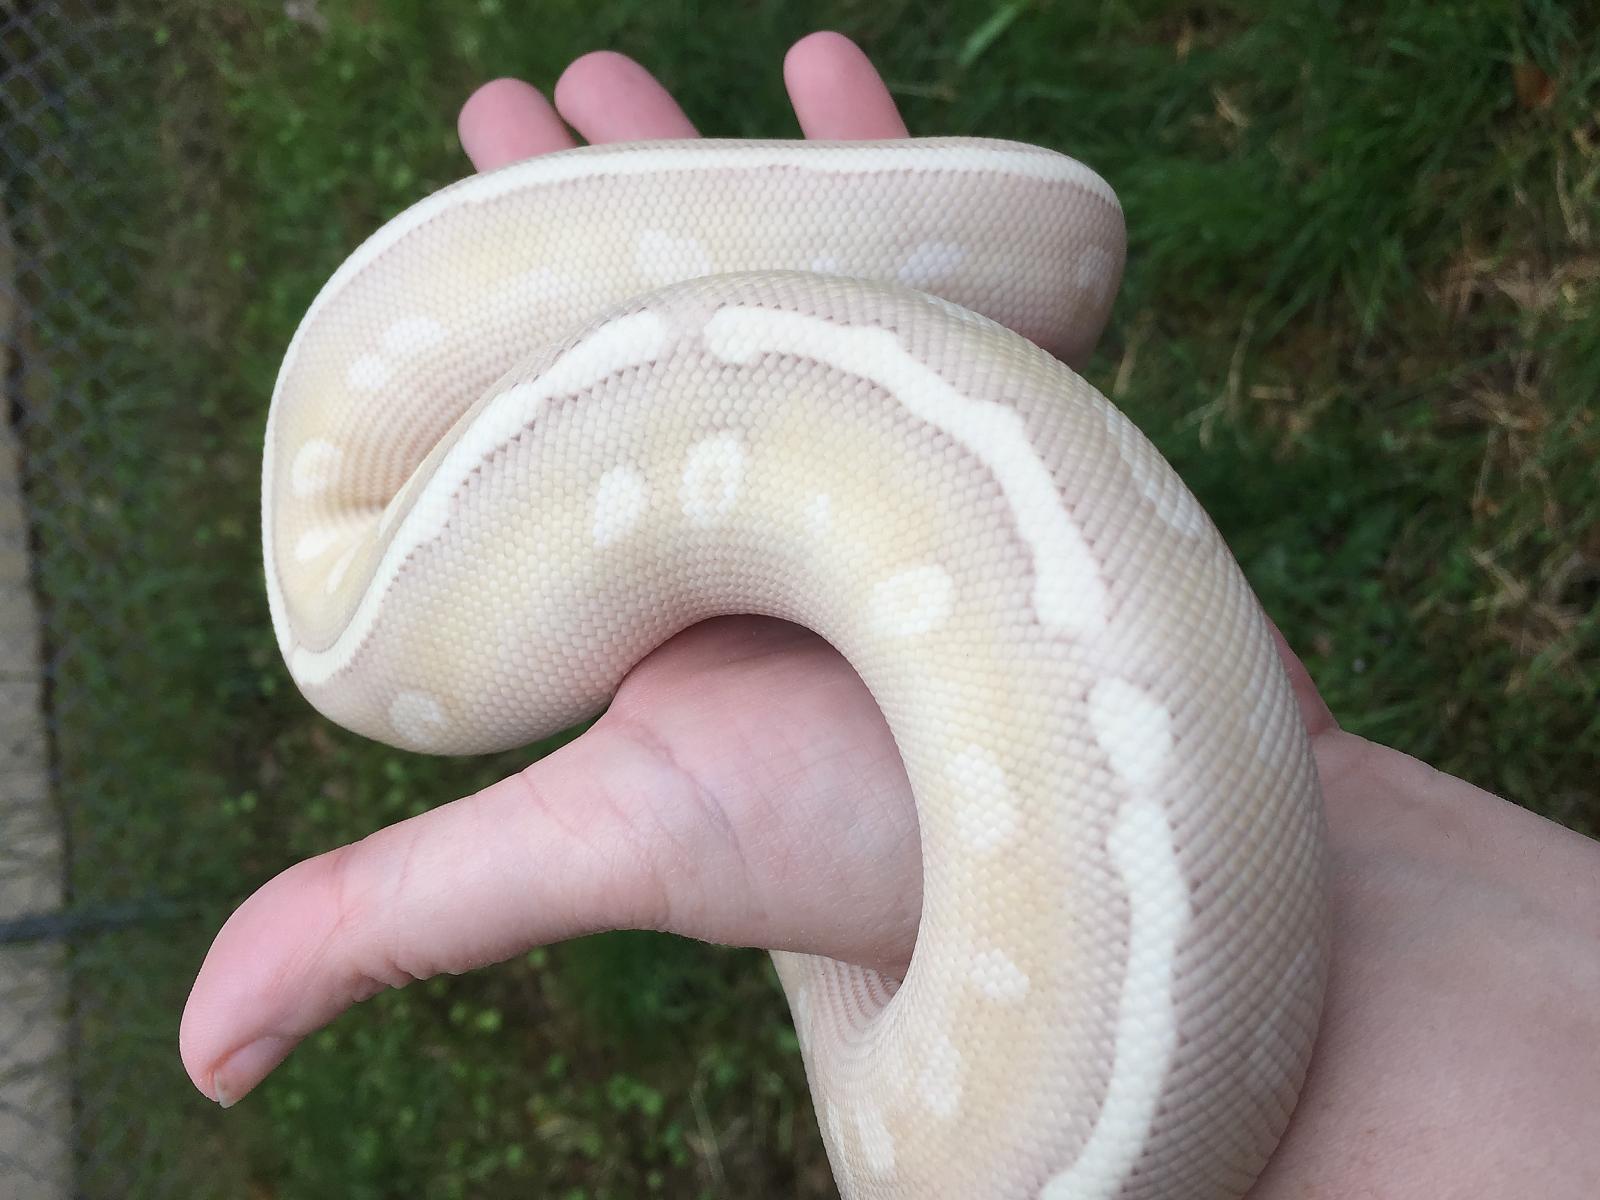 Banana potion 6 months old